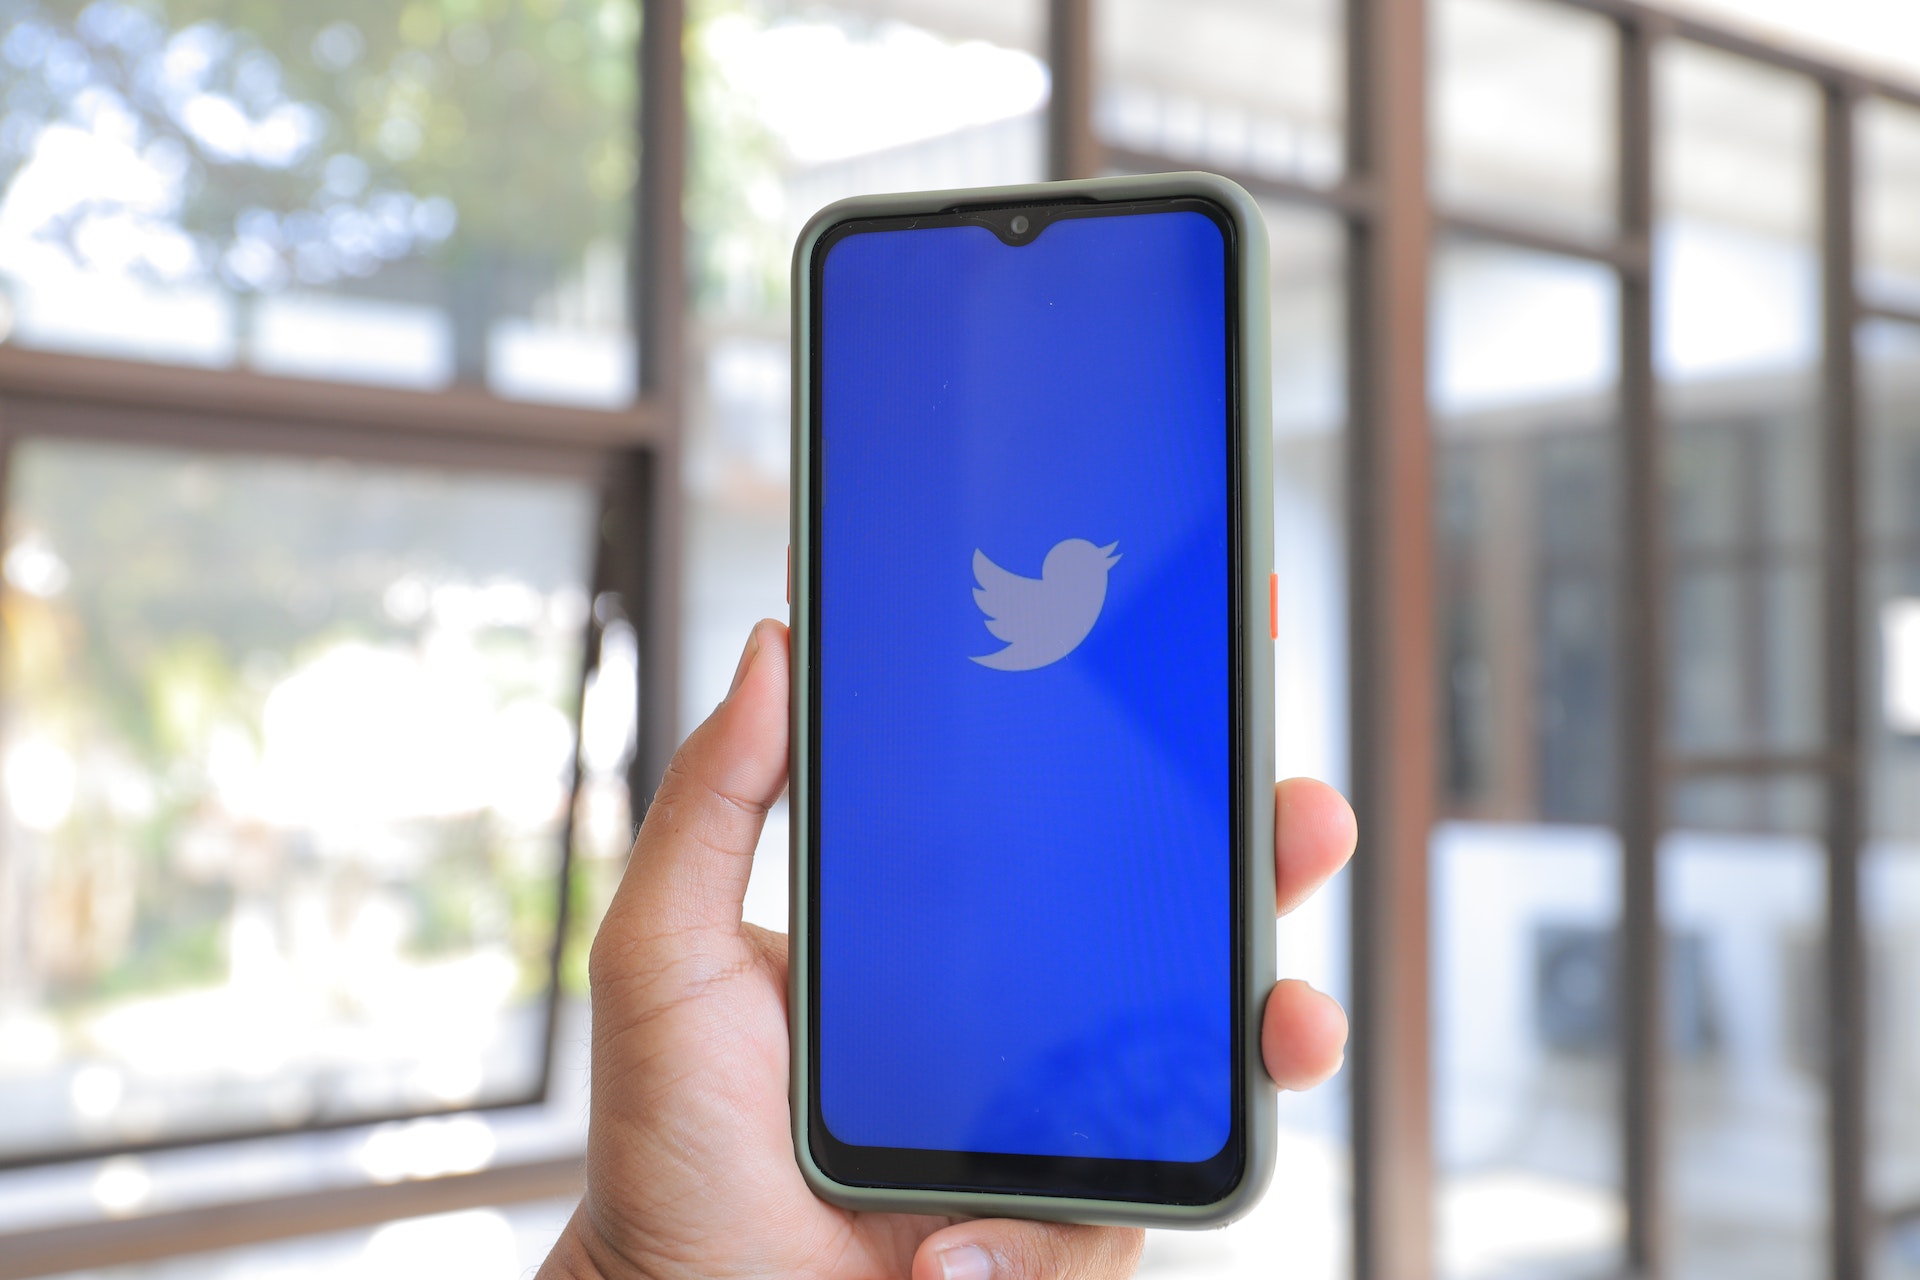 A smartphone with the Twitter app on display. Photo by: Pexels.com